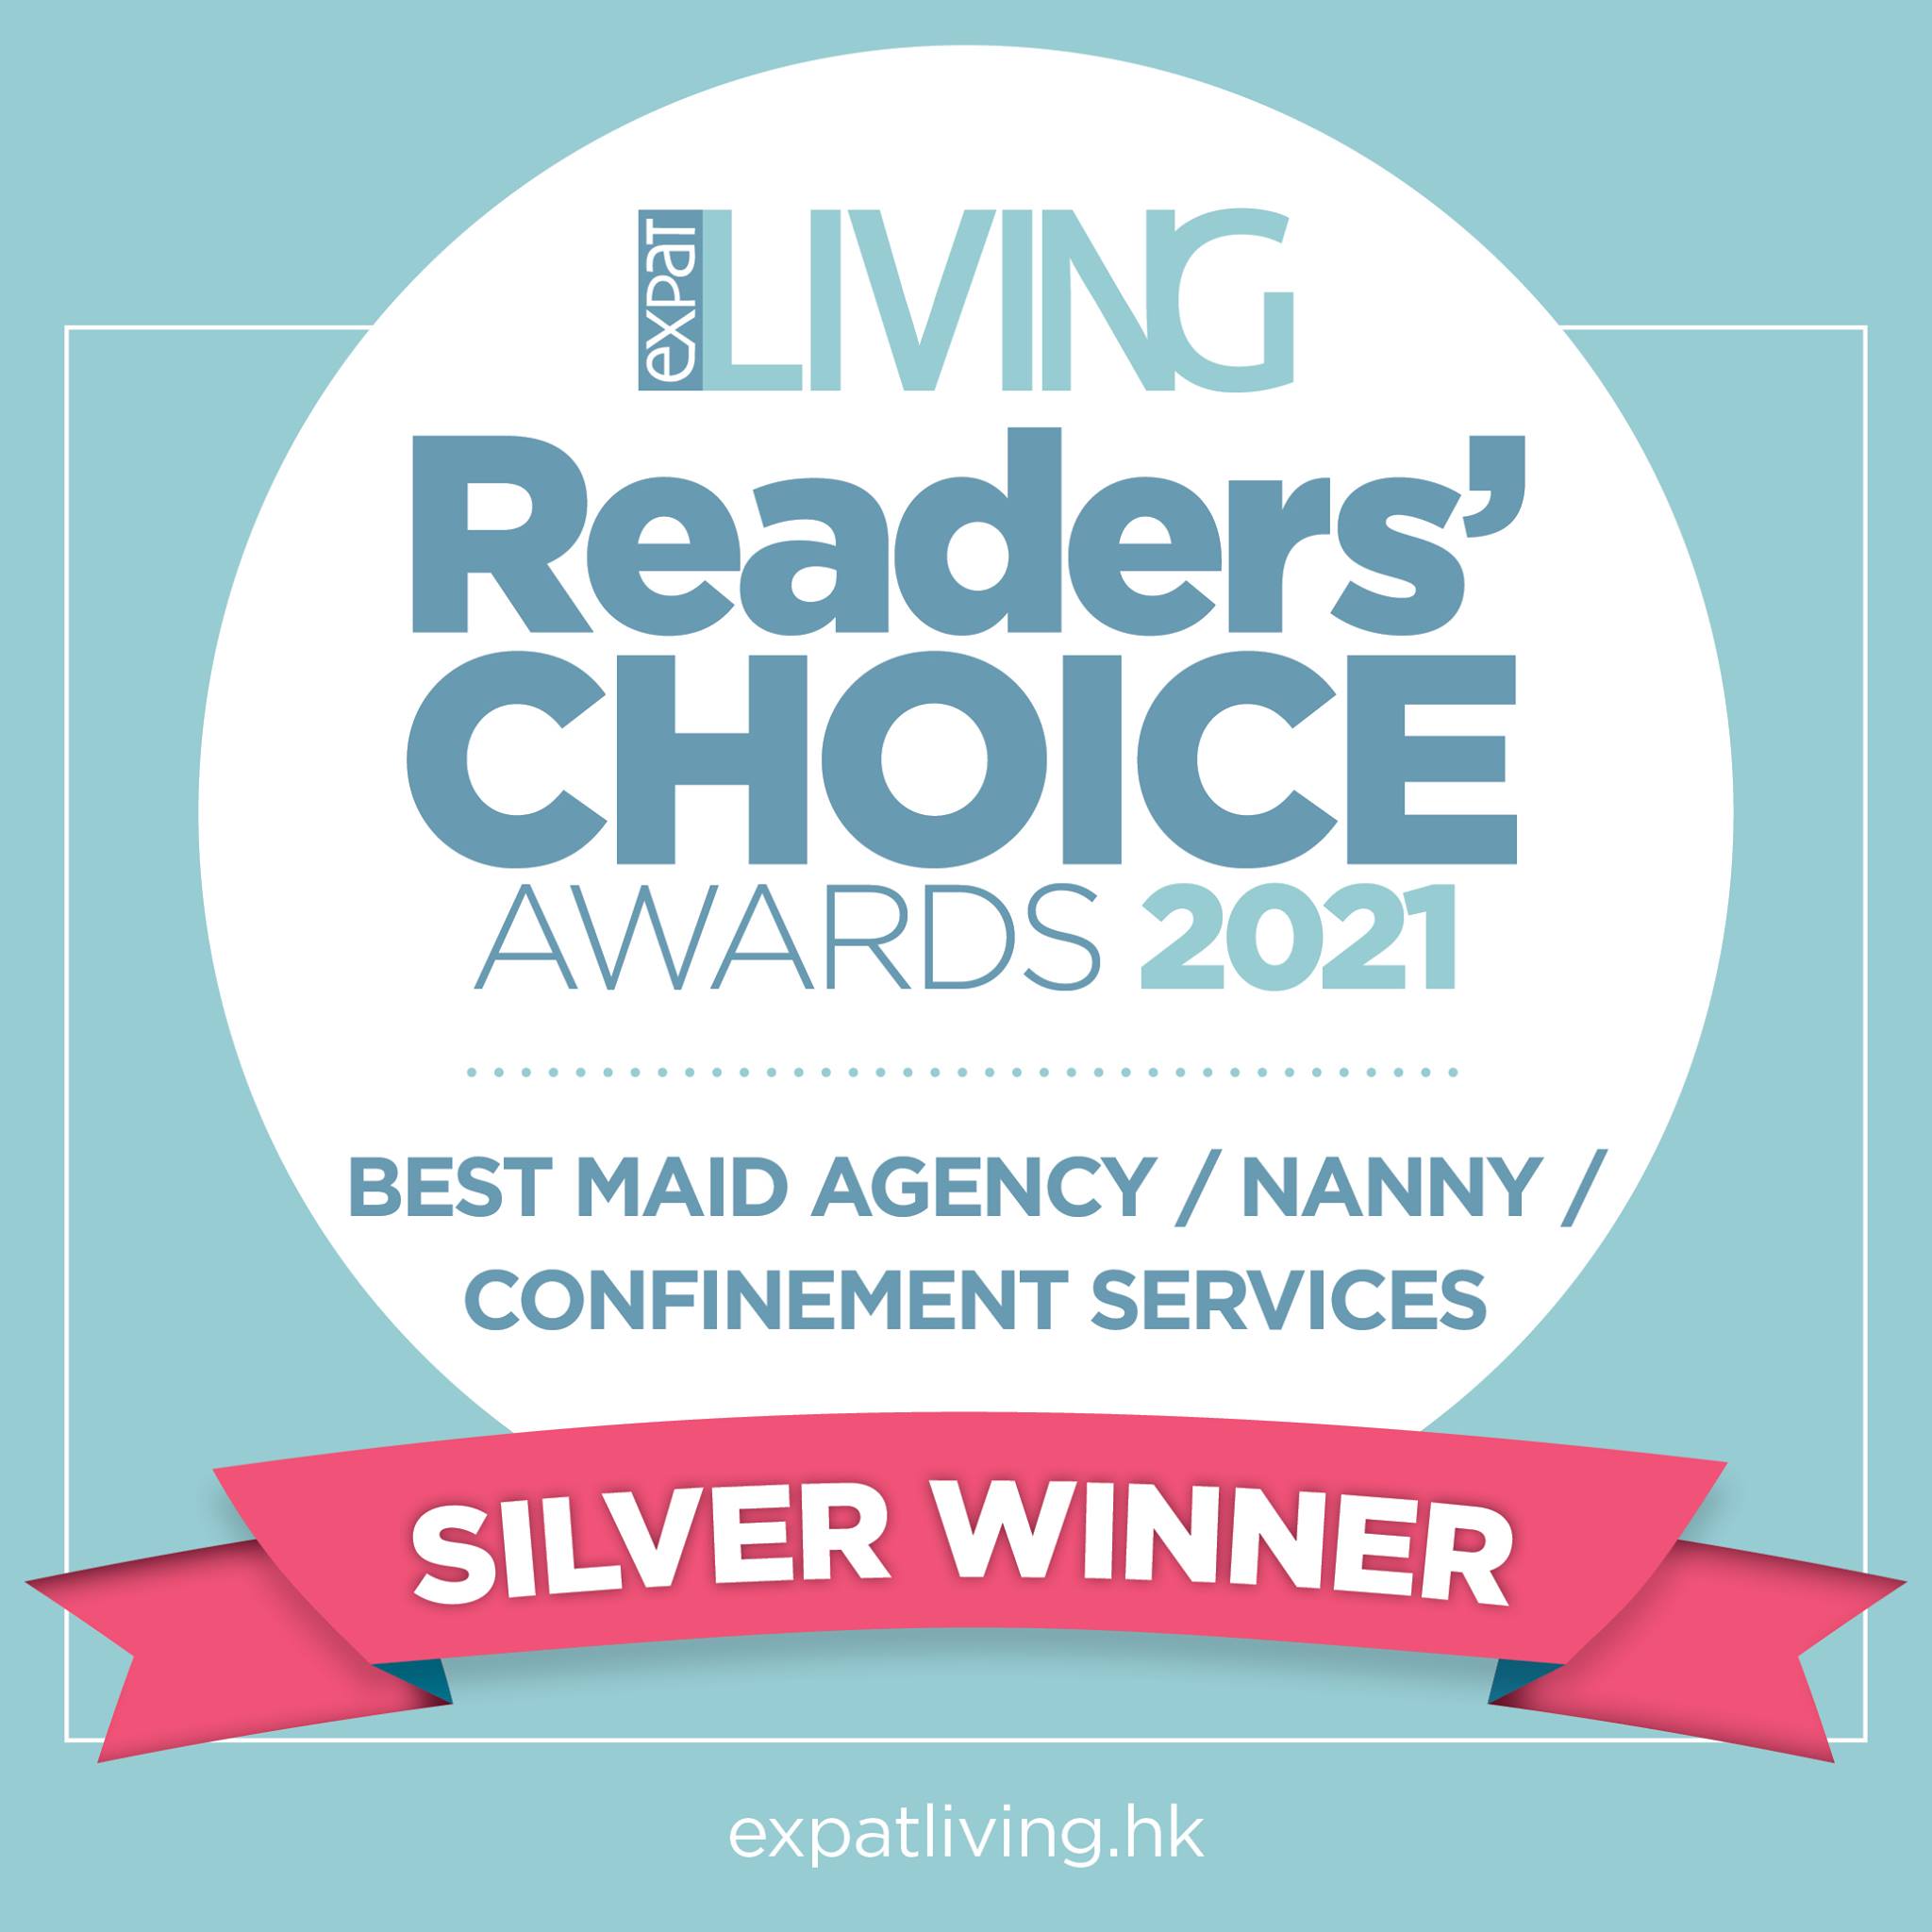 Silver winner of the Reader's Choice Awards 2021 for Employment Agency